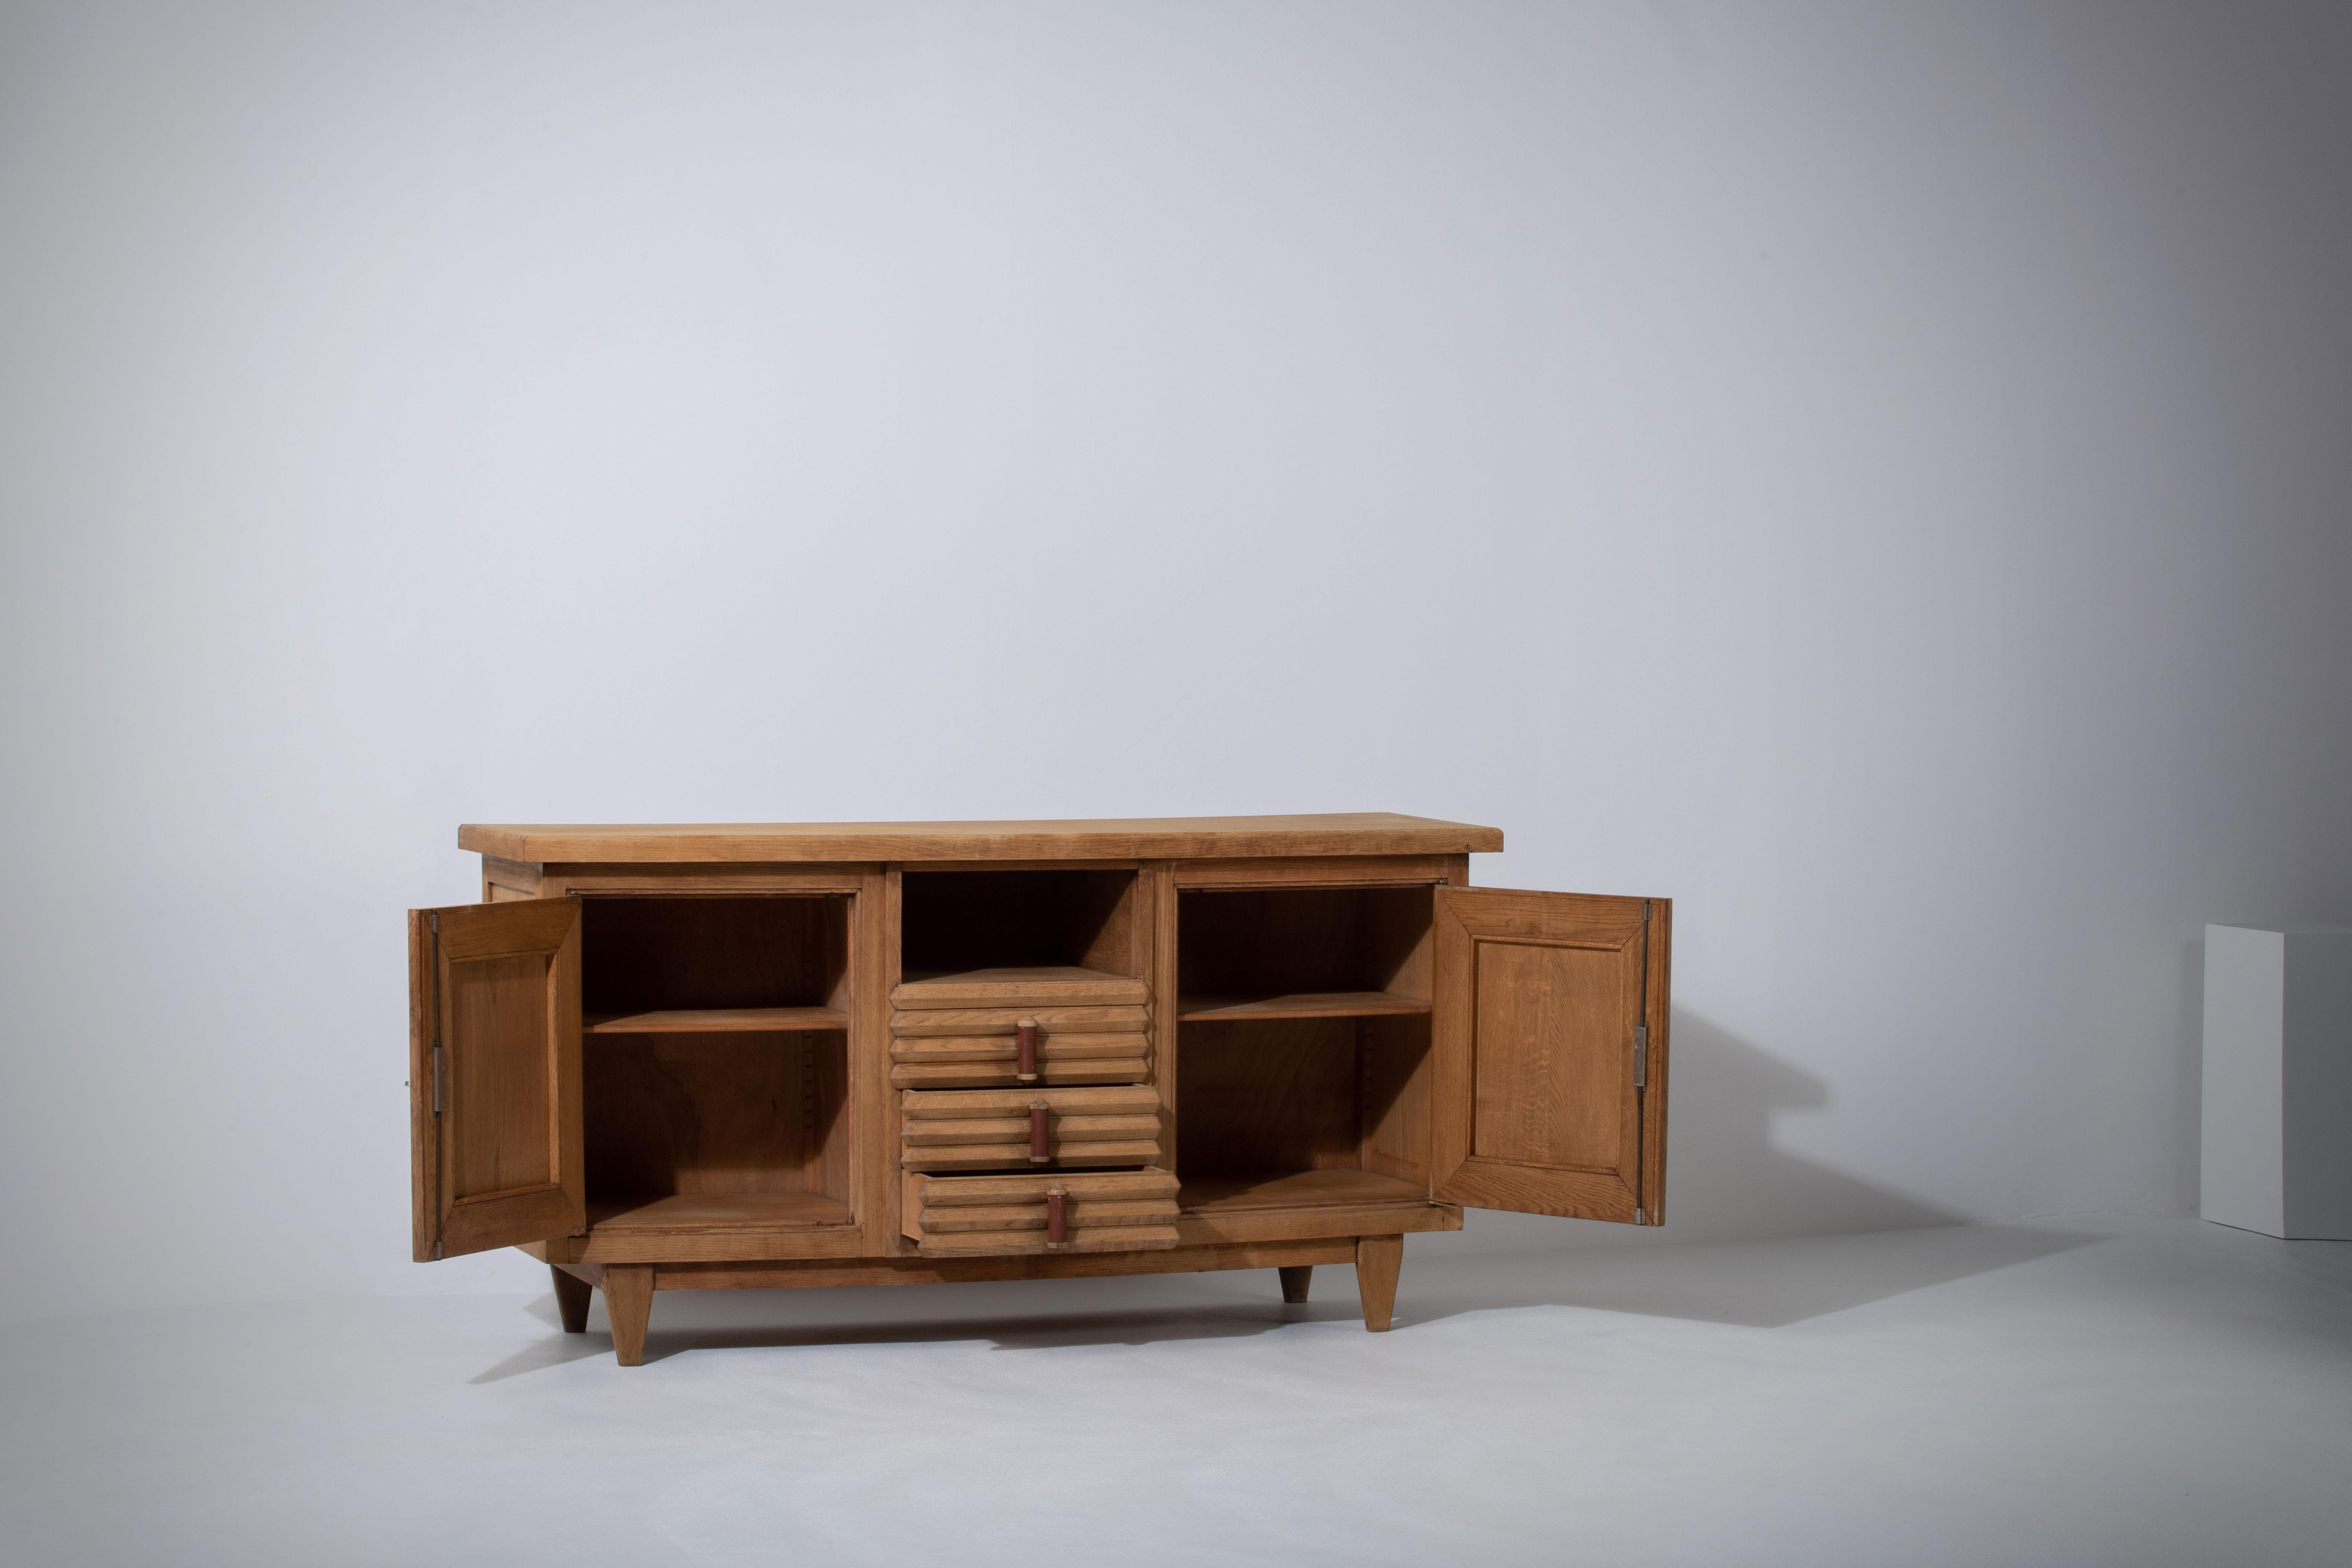 Very elegant credenza in solid oak, France, 1940s.
Large Art Deco Brutalist sideboard. 
The credenza consists of three storage facilities.
It is covered with very detailed designed doors. 
Very elegant 
The refined wooden structures on the